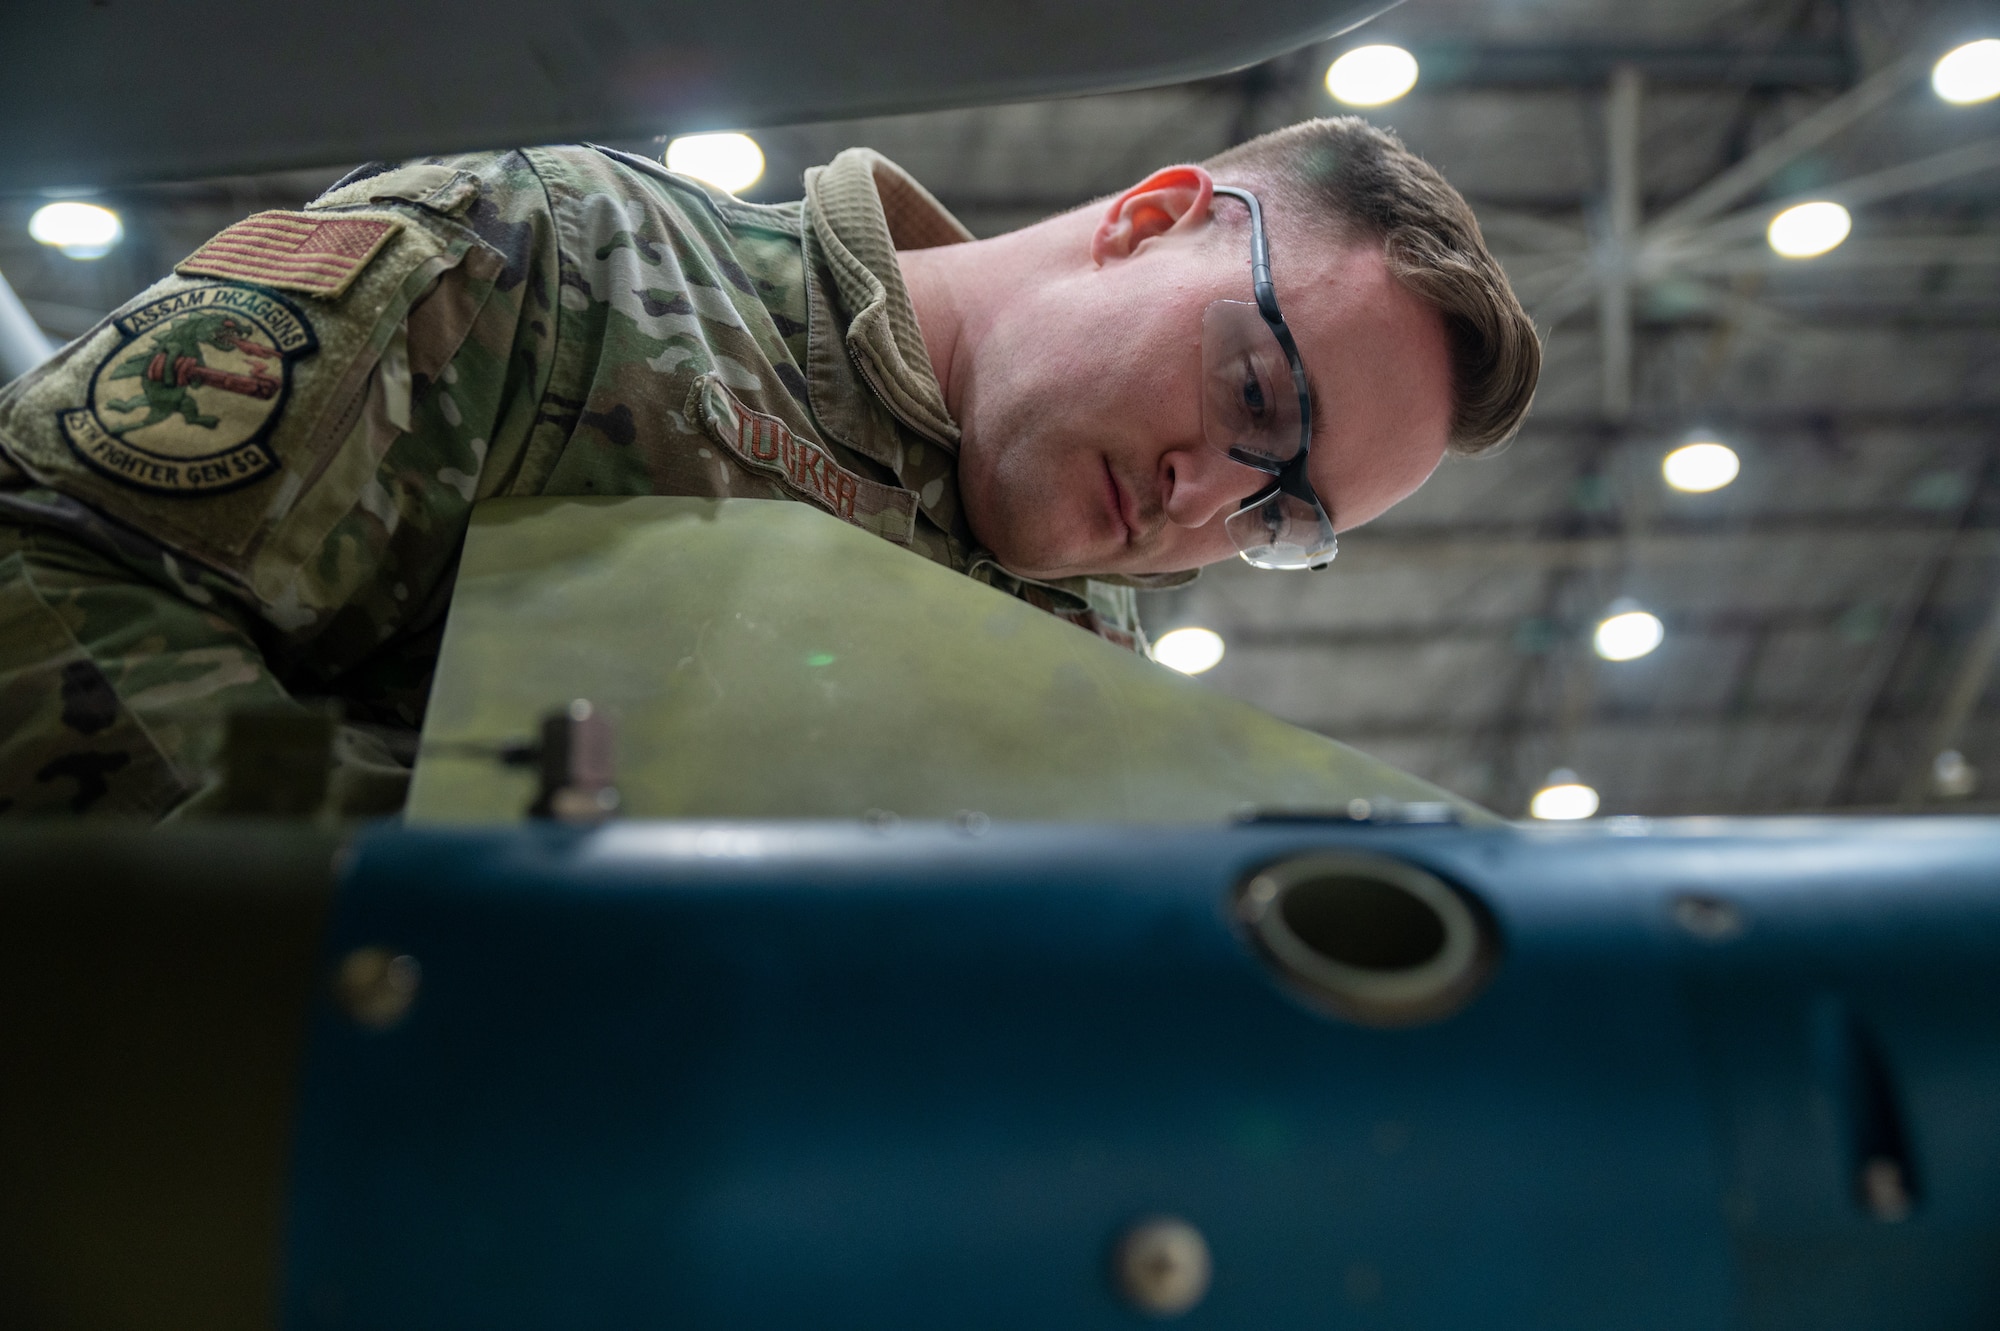 U.S. Air Force Senior Airman Alec Tucker, 25th Fighter Generation Squadron weapons load crew member, loads munitions onto an A-10C Thunderbolt II during the weapons load crew of the quarter competition at Osan Air Base, Republic of Korea, Jan. 12, 2023. As part of the competition, teams are evaluated on how quickly and efficiently they are able to inspect and load munitions onto their respective aircraft. (U.S. Air Force photo by Airman 1st Class Aaron Edwards)